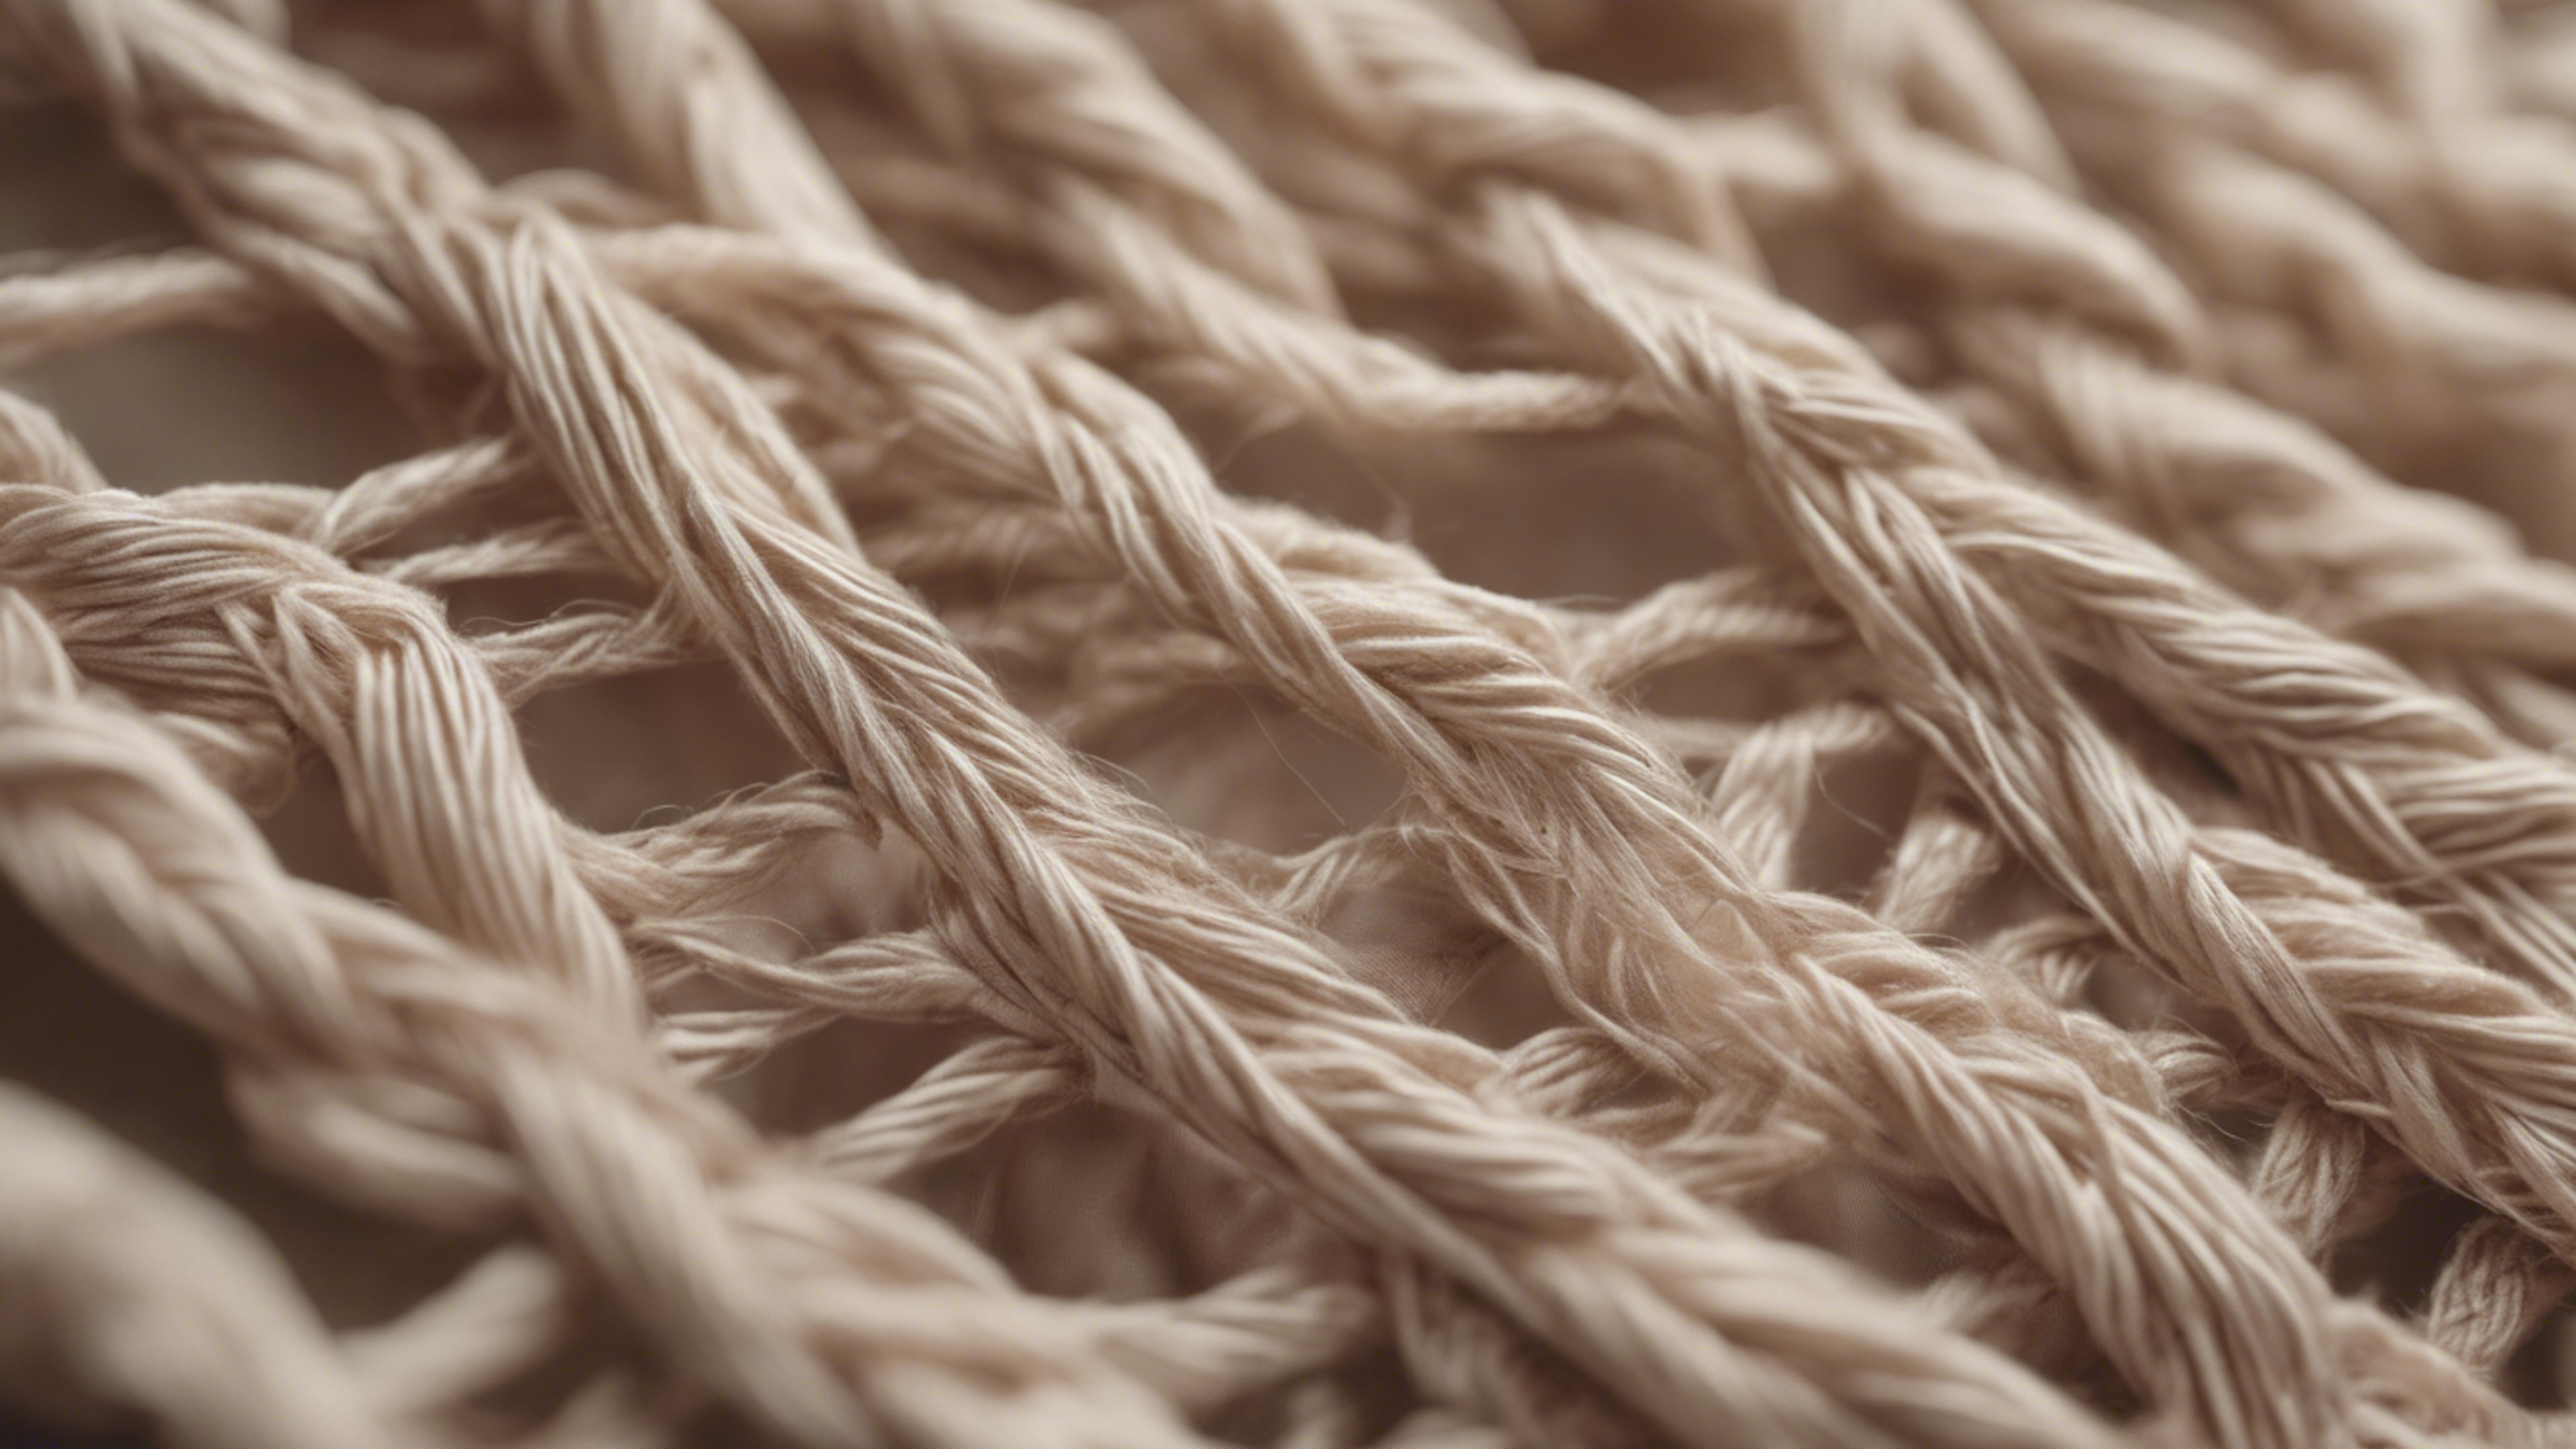 A close-up of cool beige threads interweaving to form a unique, patterned fabric. Tapeta[e47f0bd142b54d48a5a0]